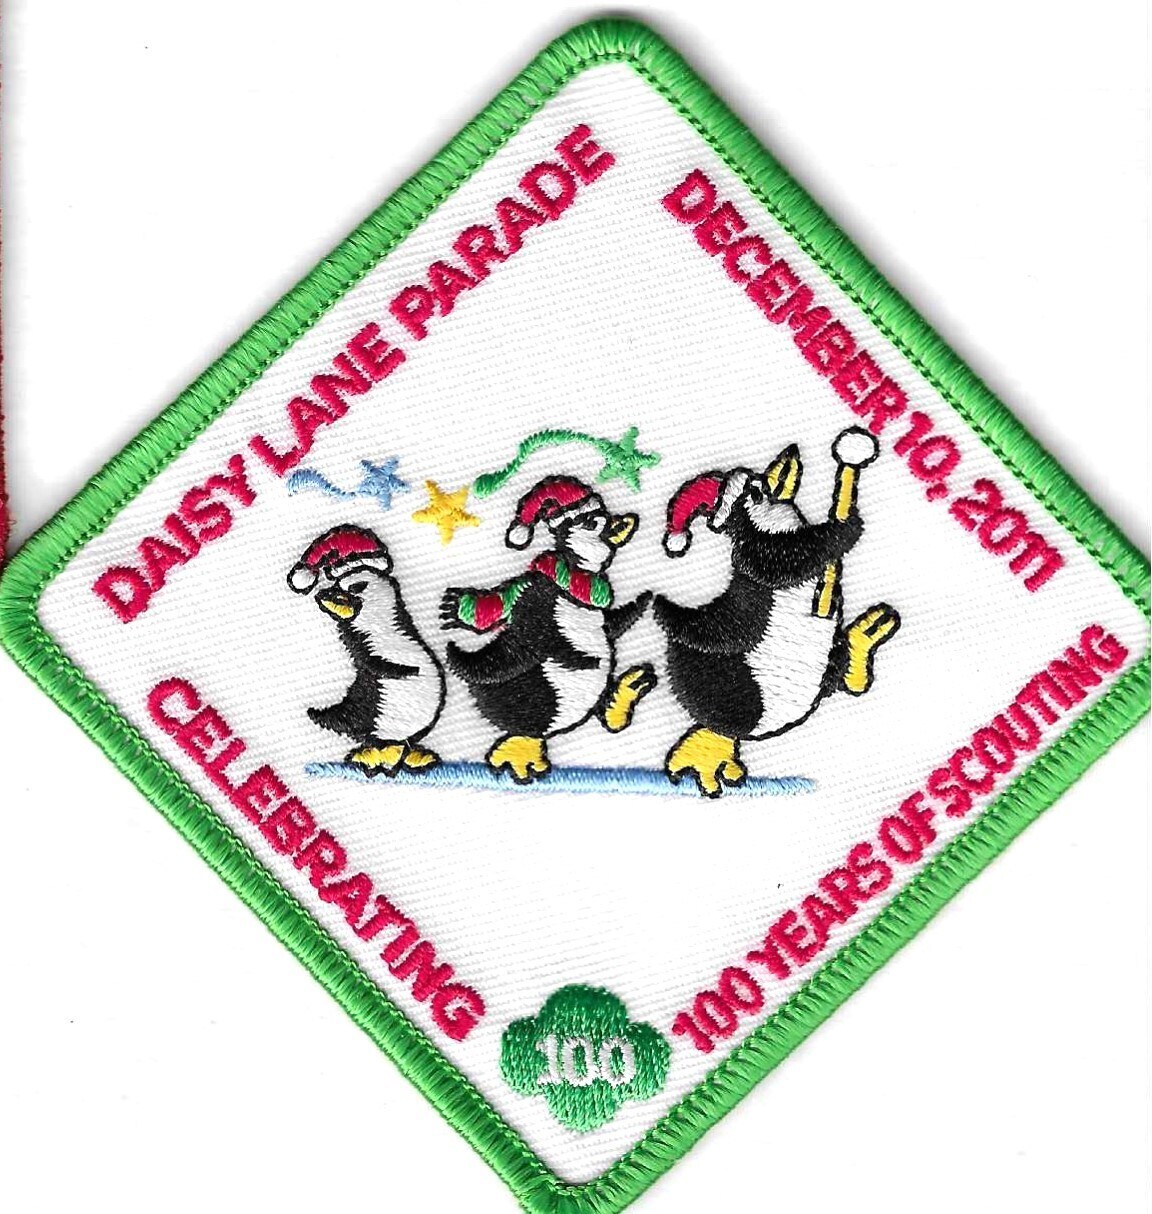 100th Anniversary Patch Daisy Lane Parade council unknown